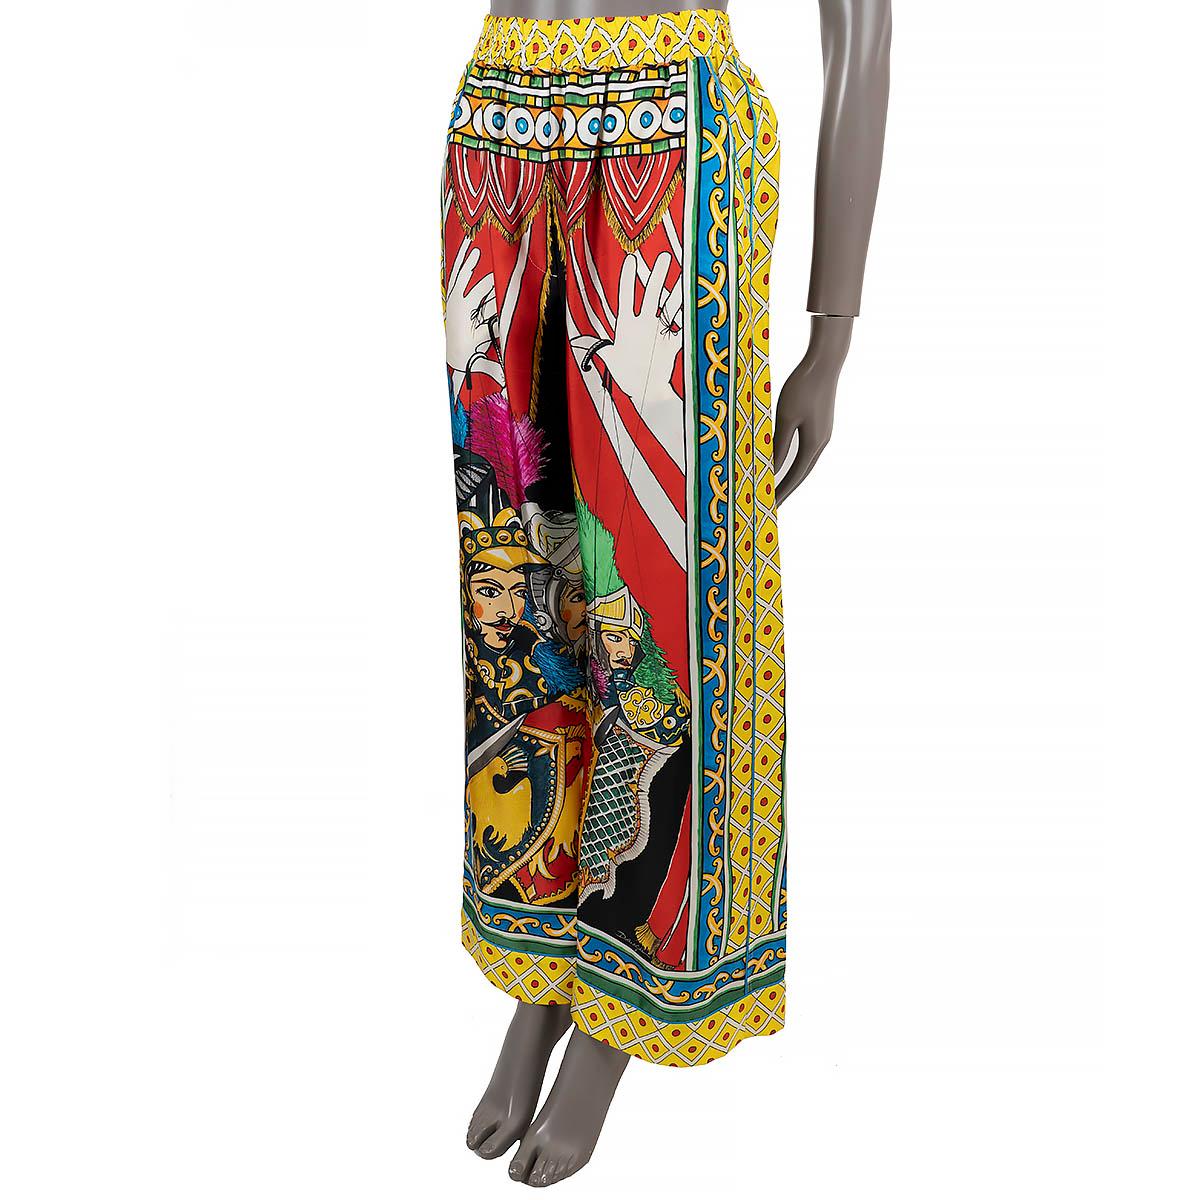 100% authentic Dolce & Gabbana palazzo pants in multicolor Carretto print silk twill (100% - please not the content tag is missing). Feature wide legs, elastic waistband and two slit pockets. Unlined. Have been worn and are in excellent condition.